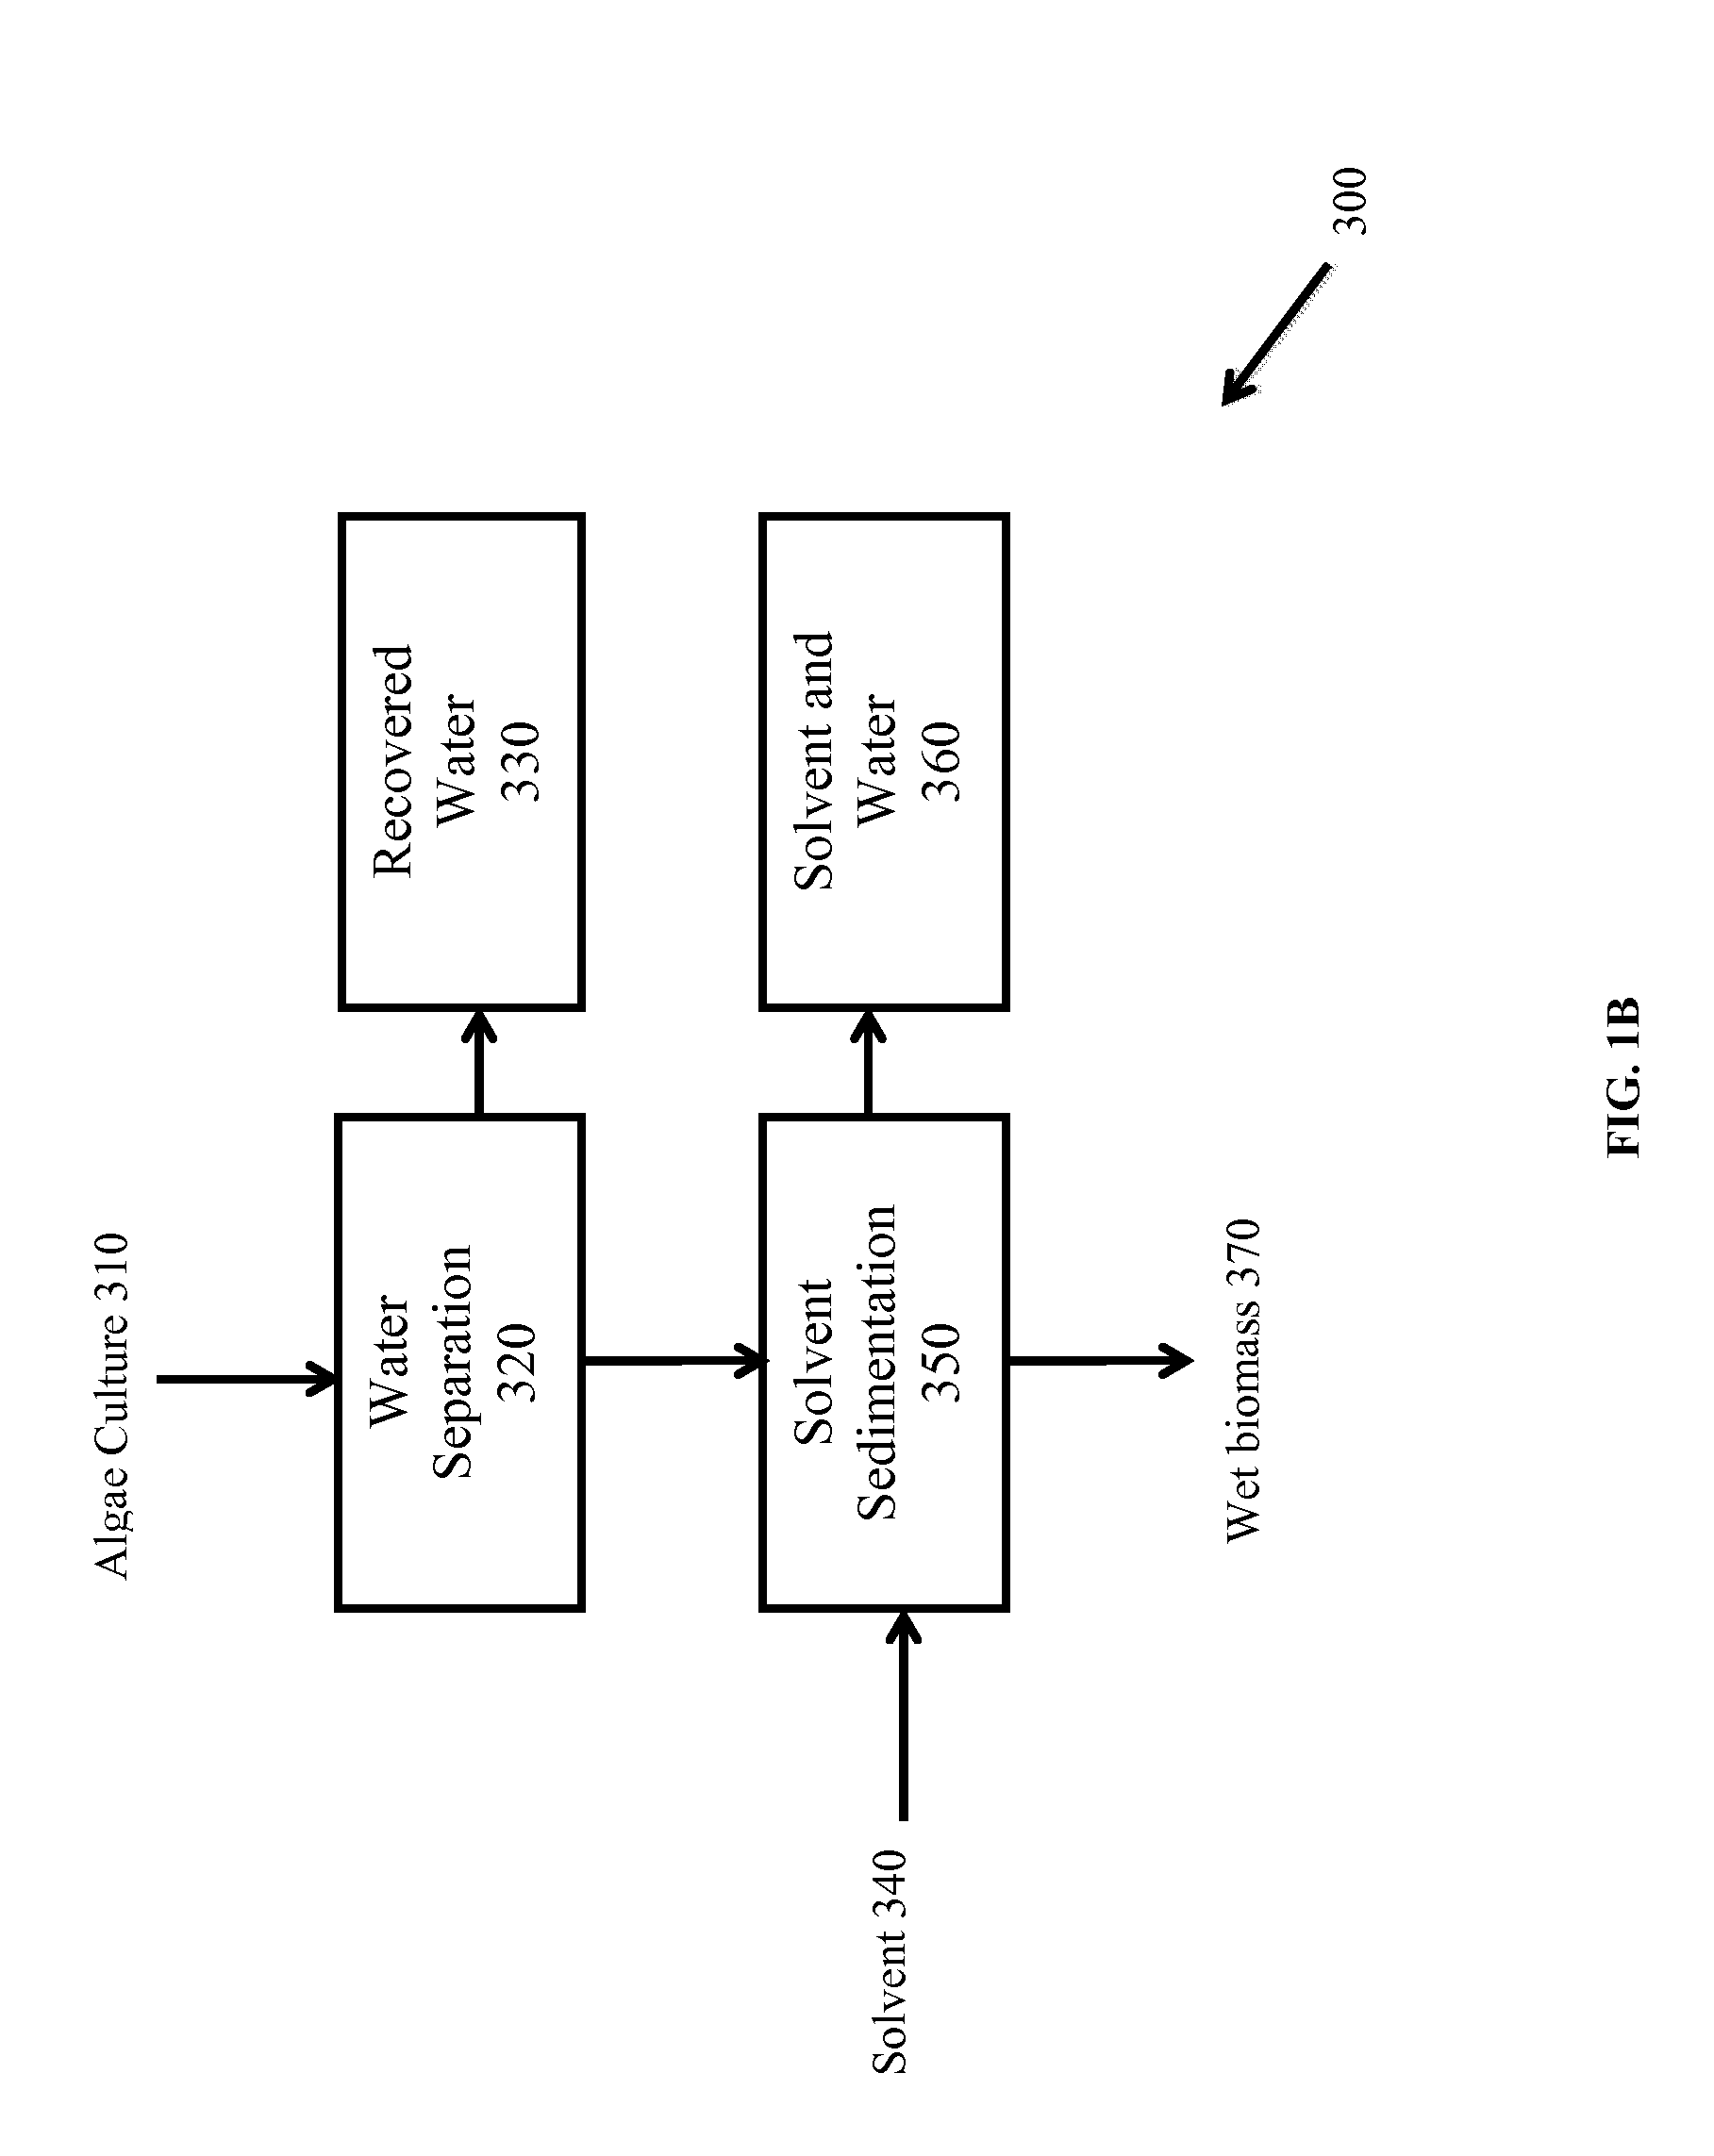 Methods of and Systems for Isolating Nutraceutical Products from Algae